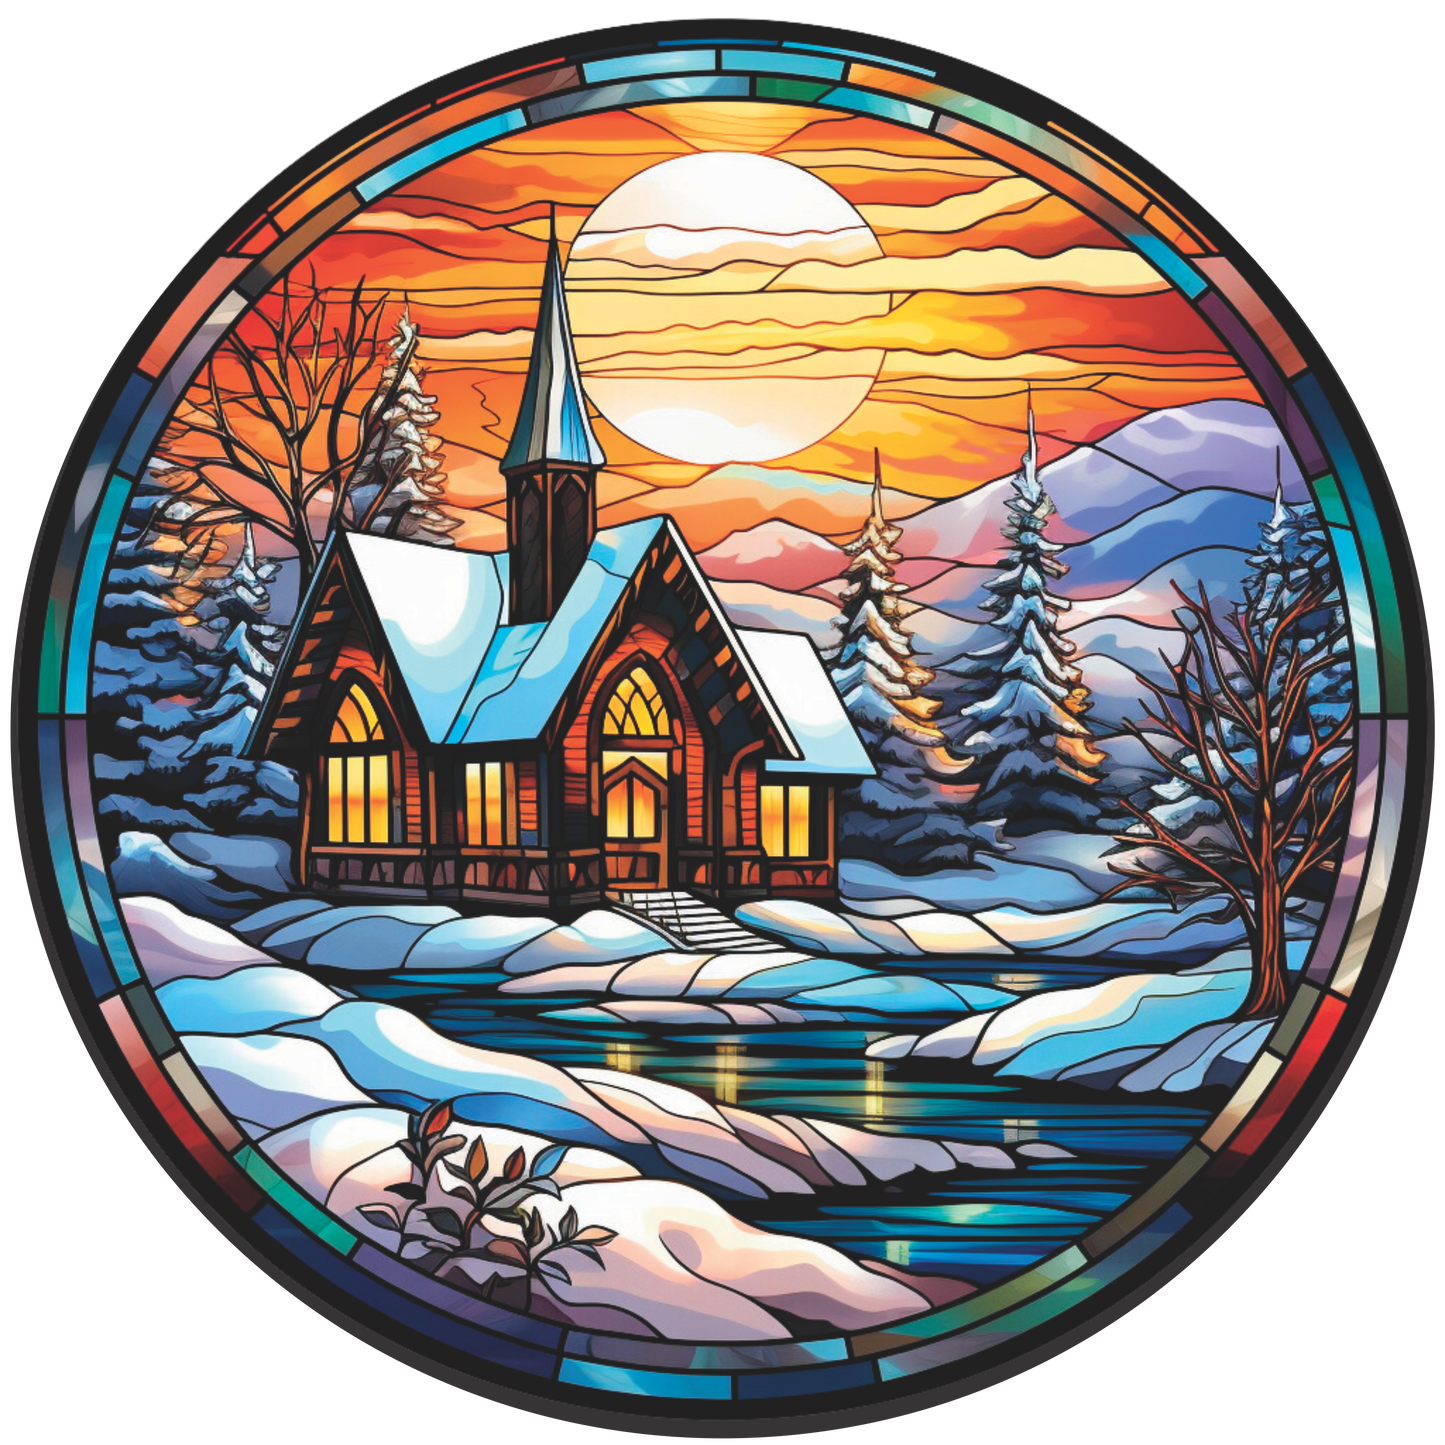 Church at Sunset in Faux Stained Glass Round